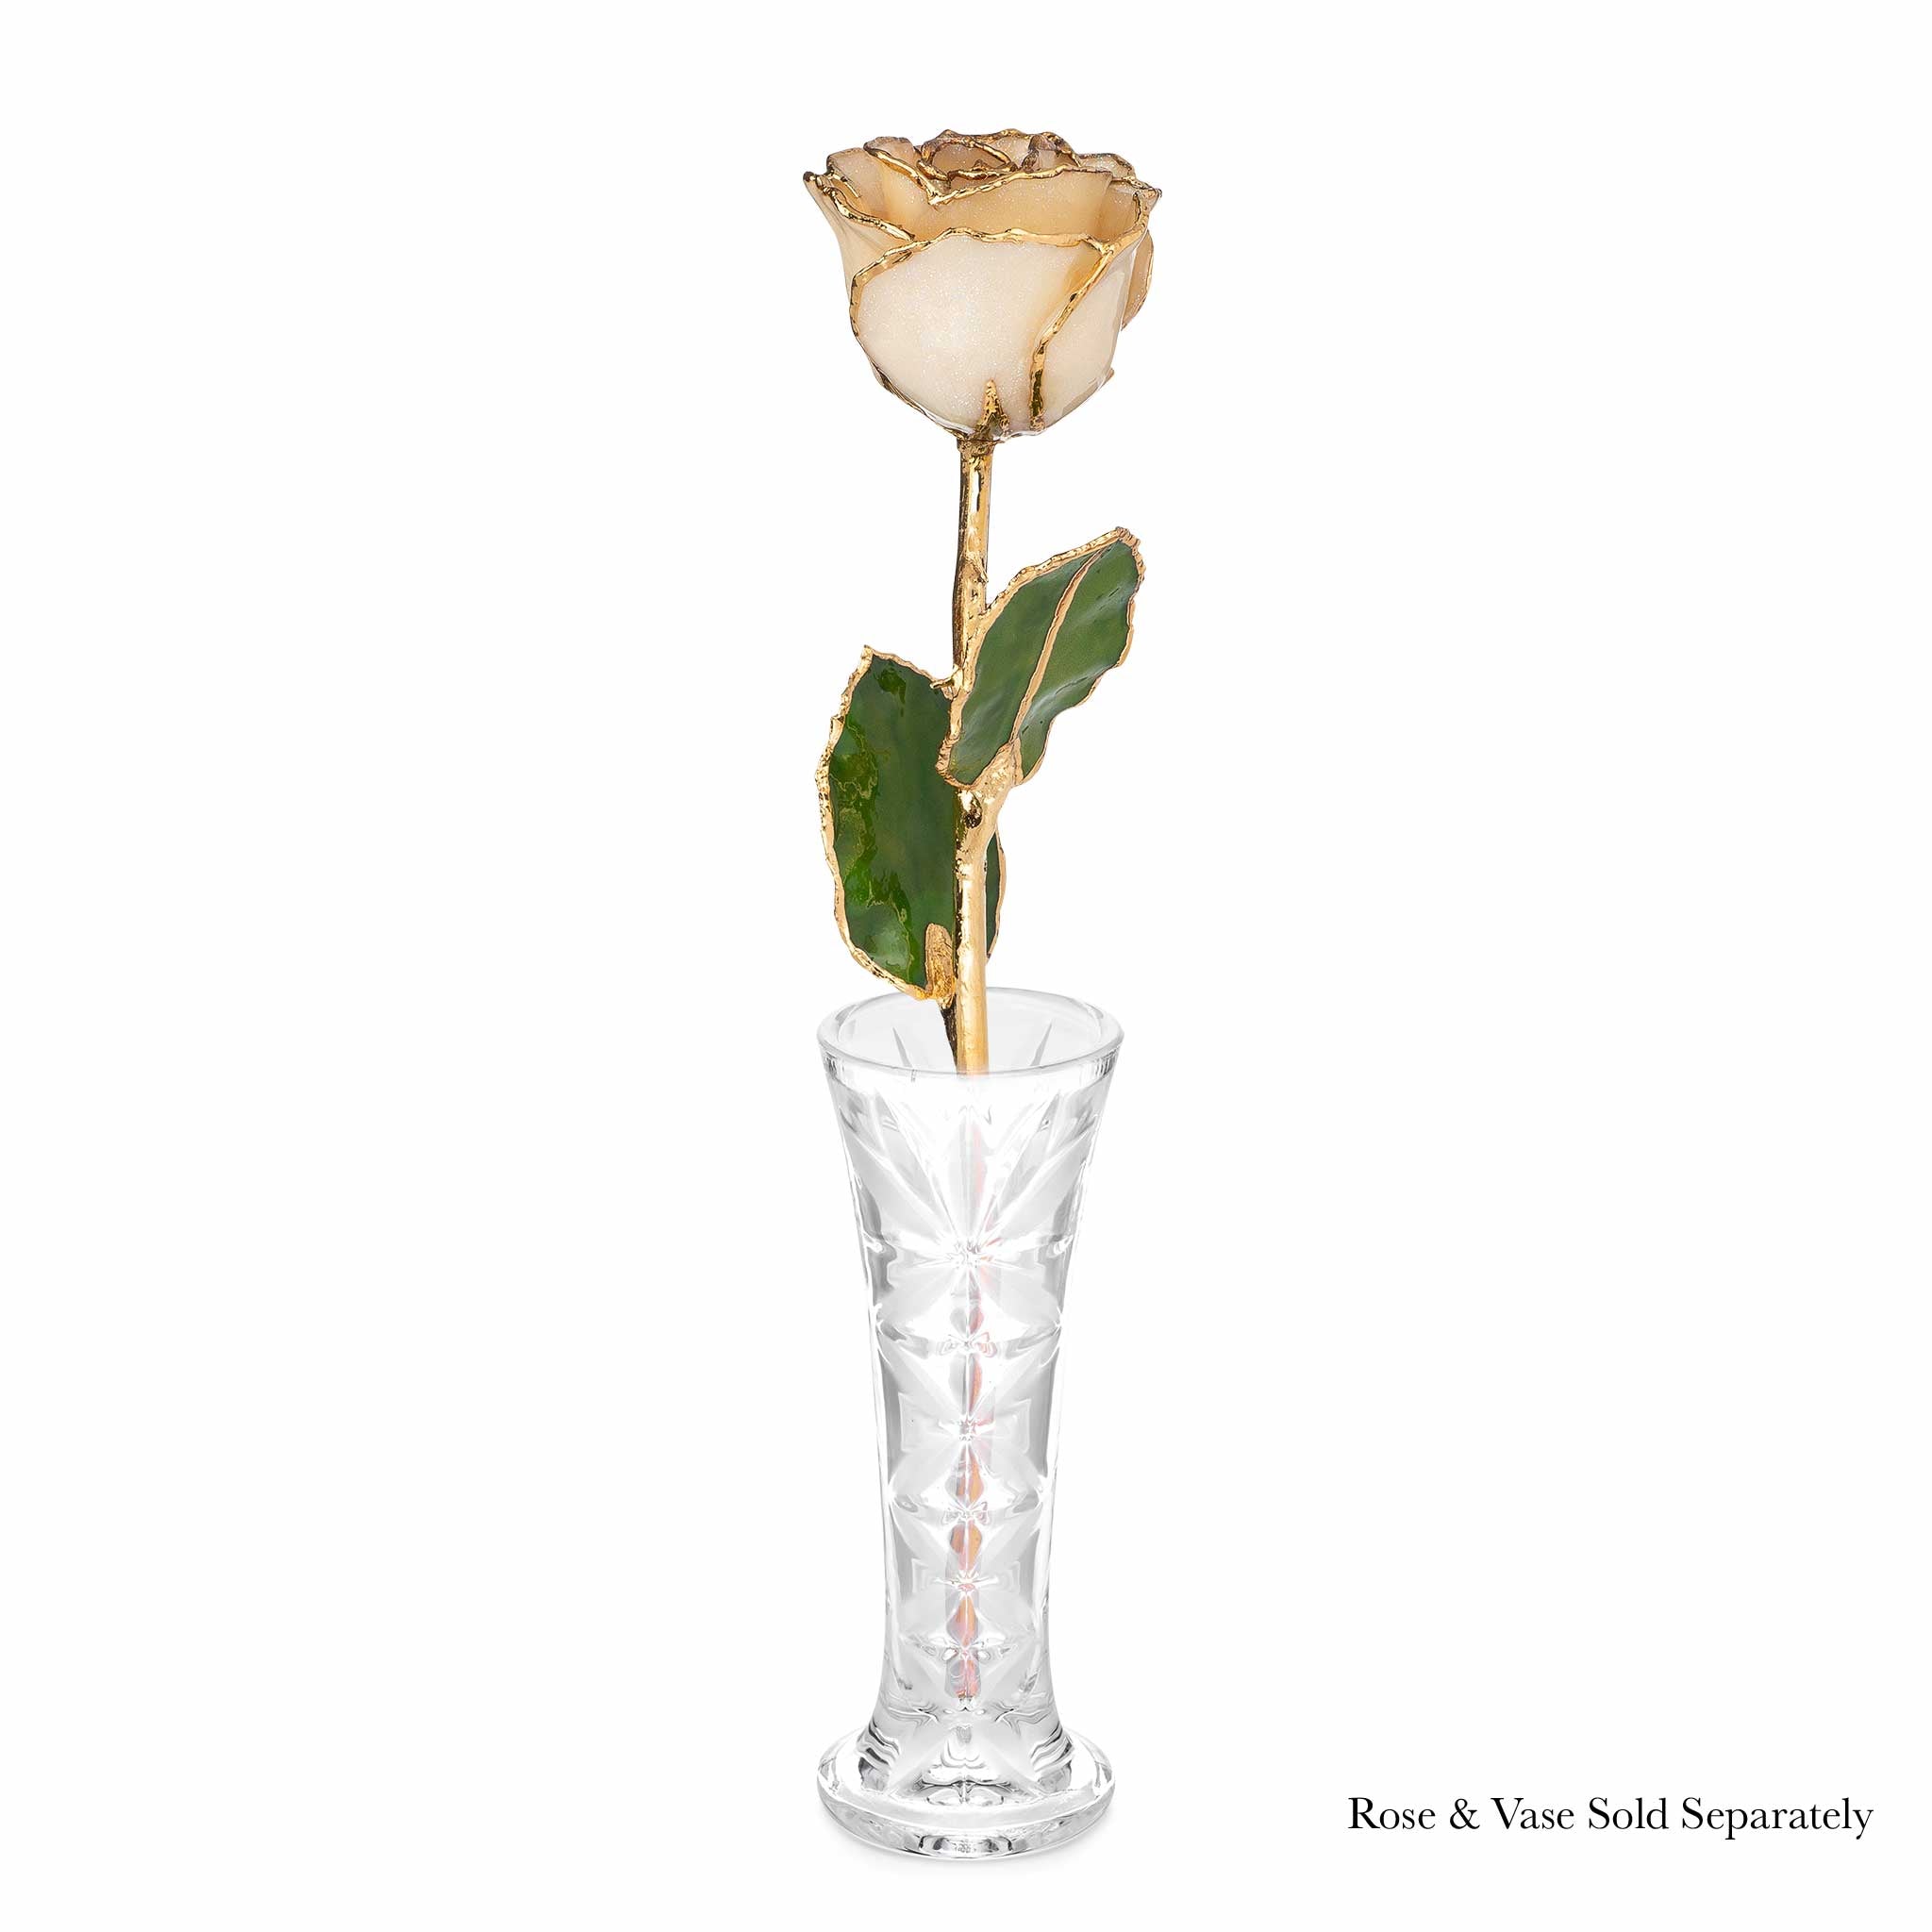 24K Gold Trimmed Forever Rose with Diamond Petals with Sparkles. View of Stem, Leaves, and Rose Petals and Showing Detail of Gold Trim shown in optional crystal vase